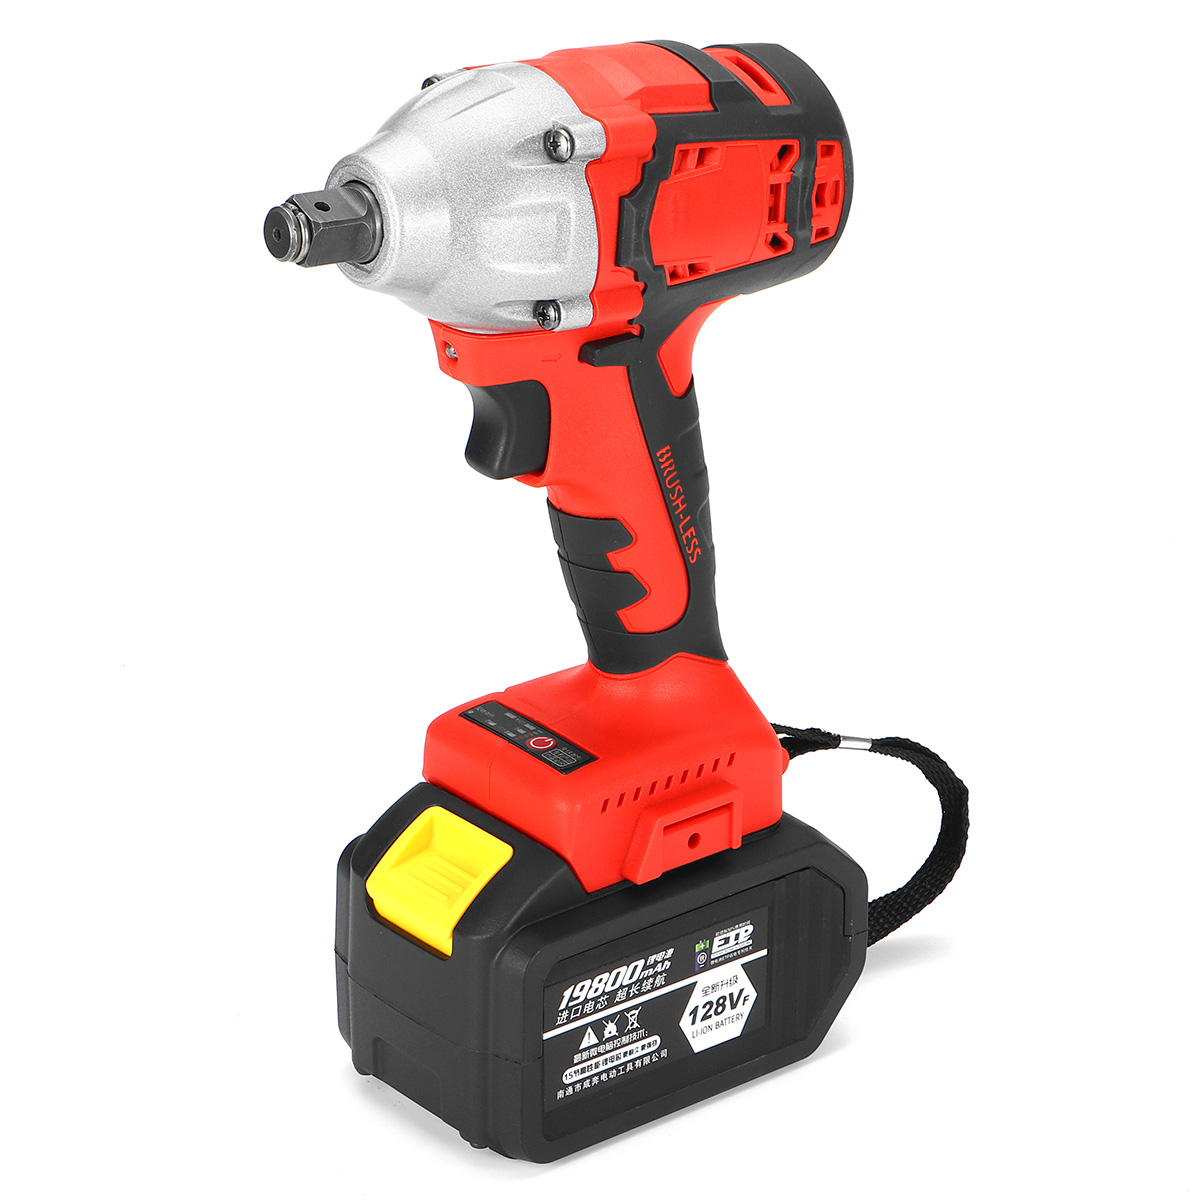 128VF-19800mah-Electric-Impact-Wrench-Brushless-Cordless-Drill-Tool-With-Battery-1685512-11